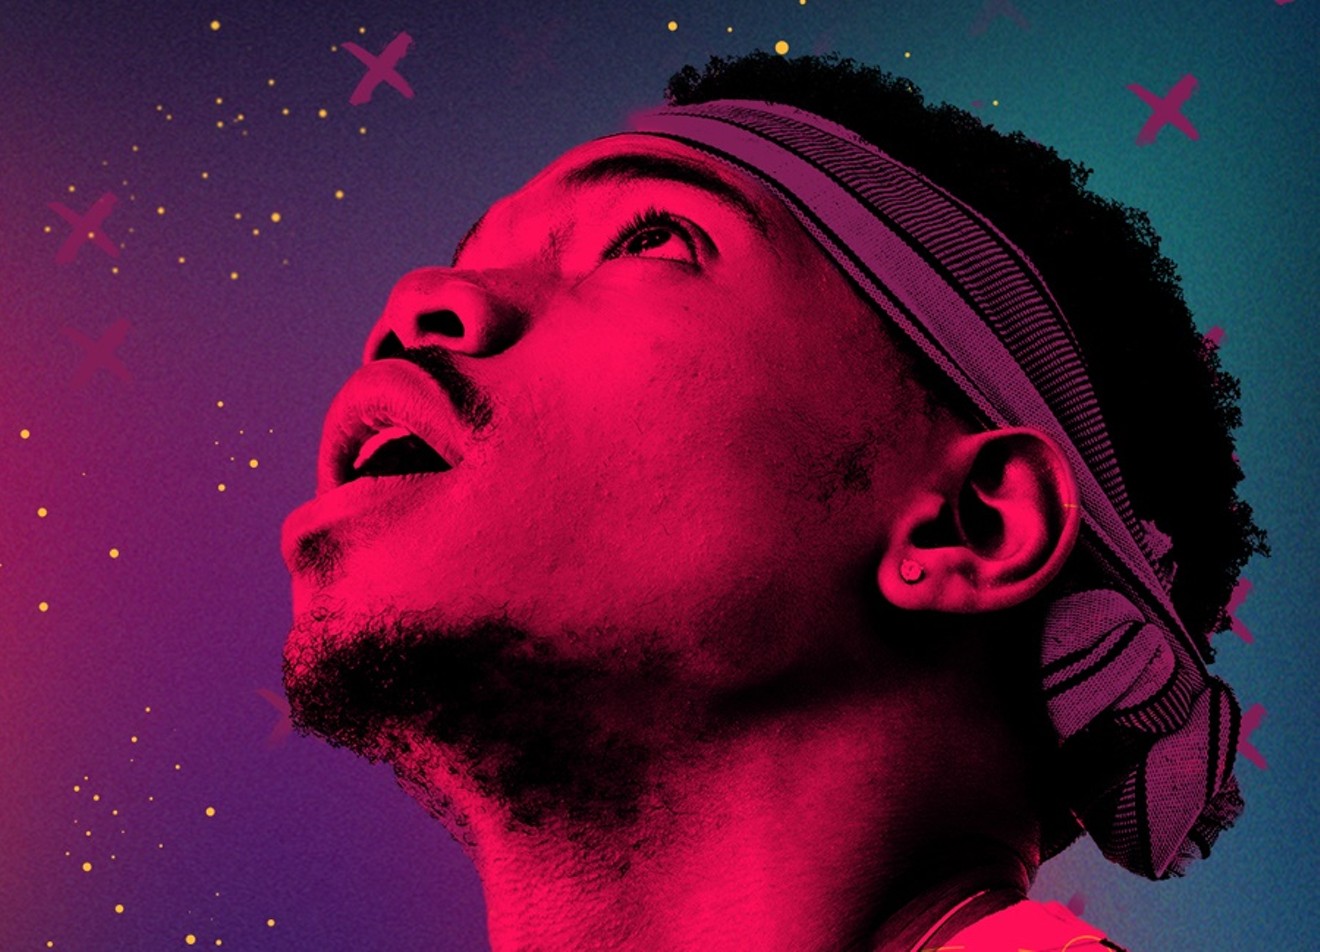 Chance the Rapper is scheduled to perform on Friday, October 20, at Lost Lake Festival.